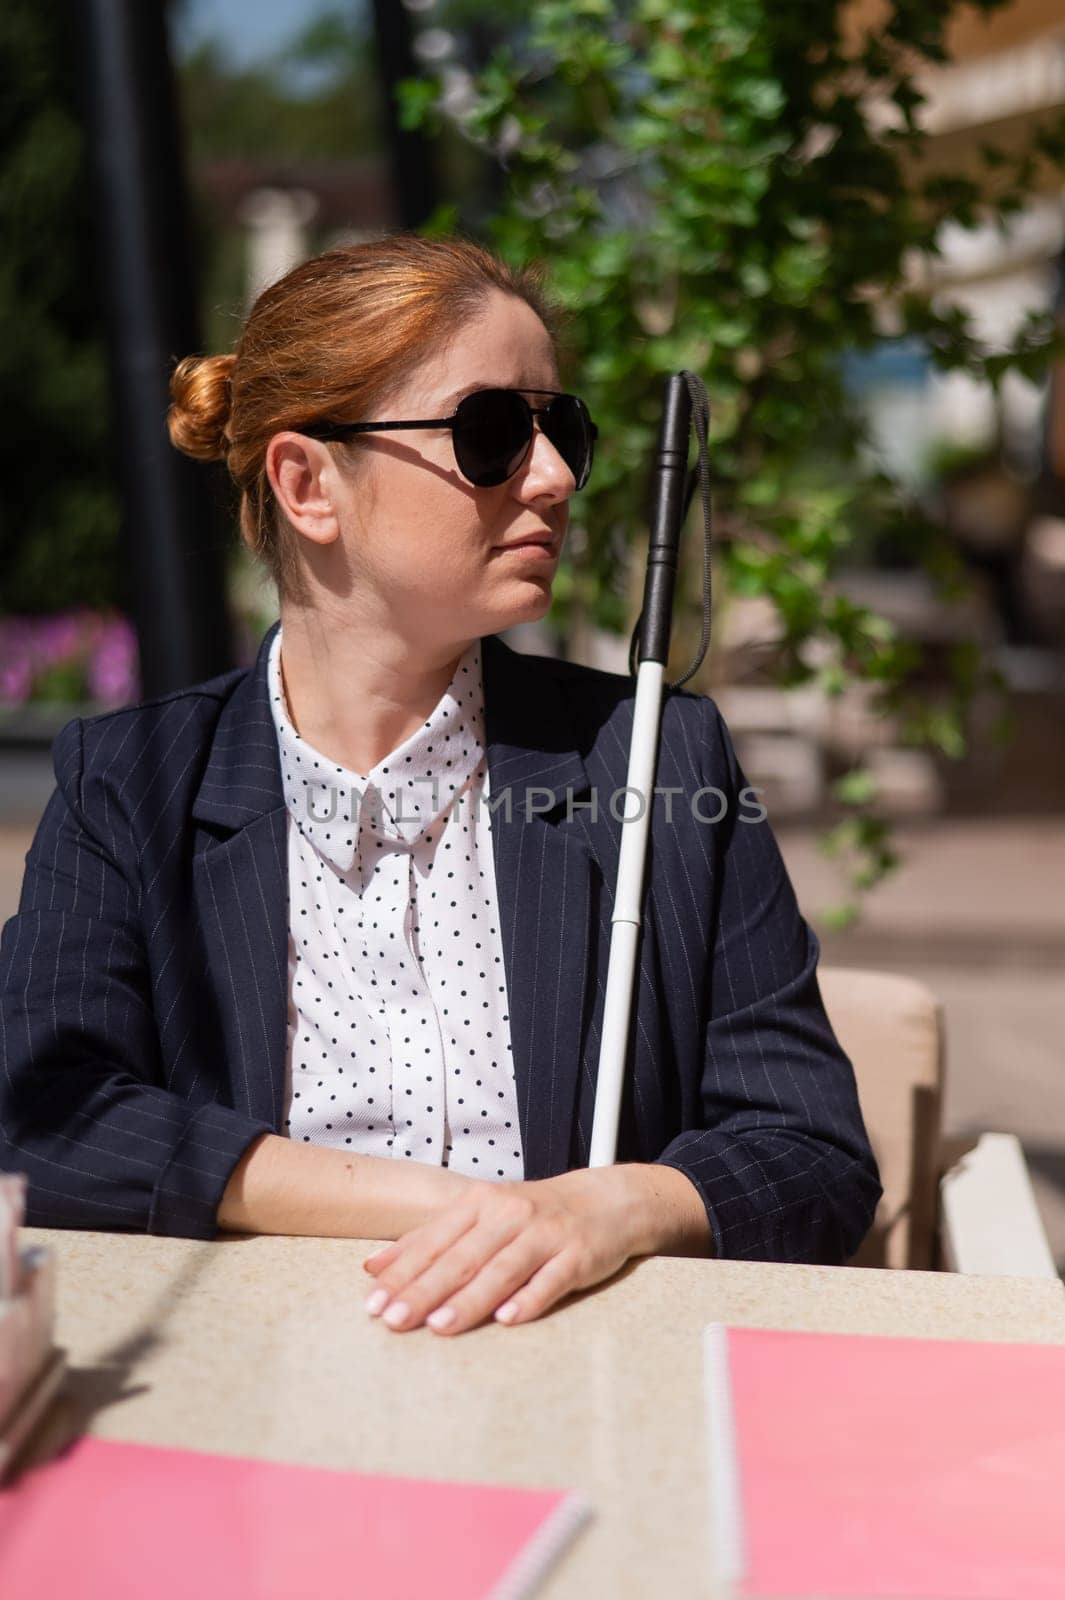 A blind woman in a business suit is sitting in an outdoor cafe. by mrwed54